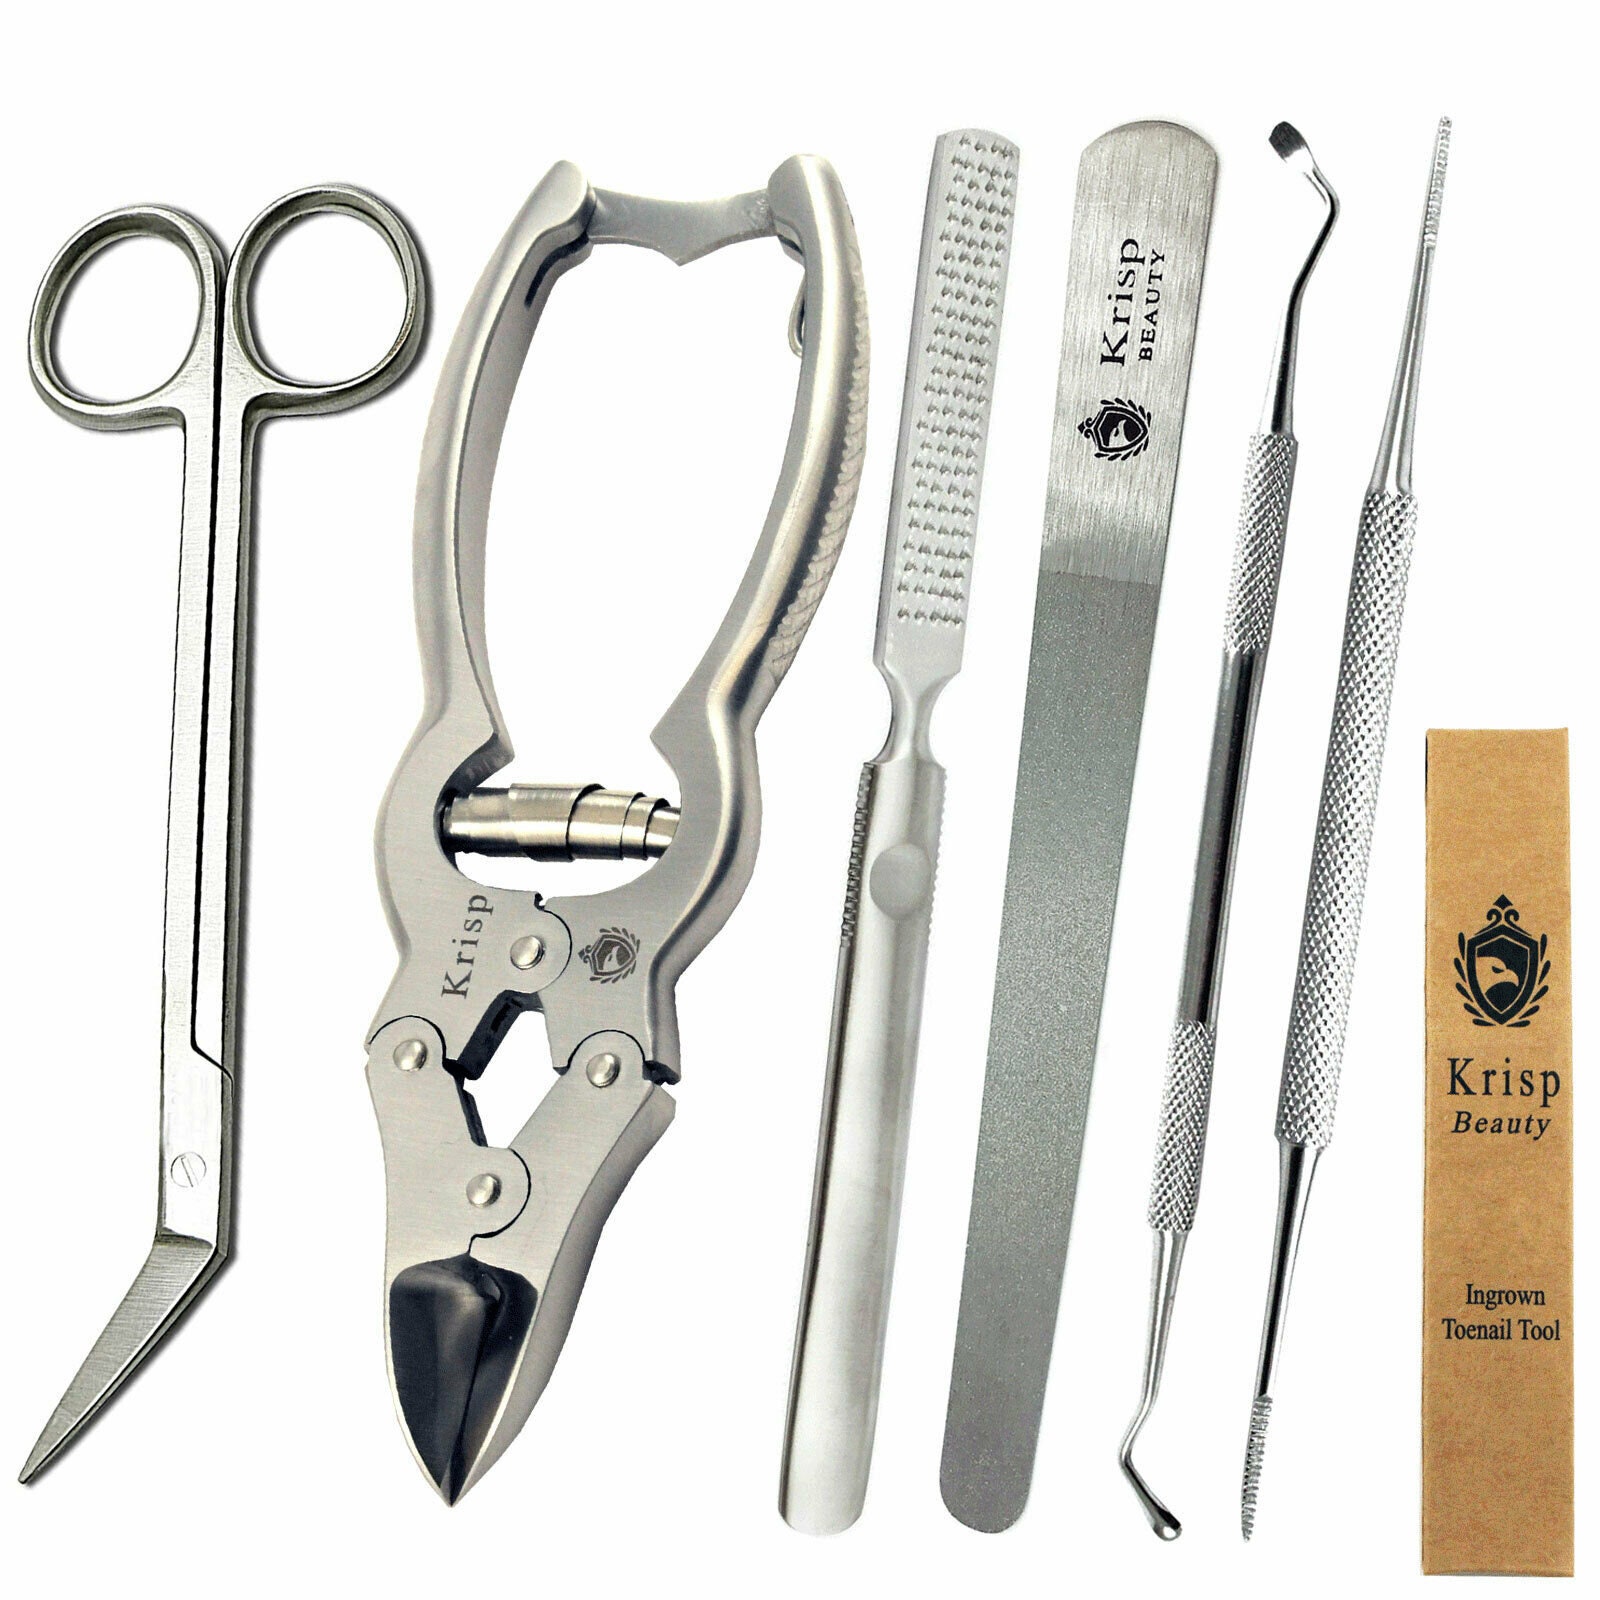 Professional Podiatrist Toenail Clippers For Thick And Ingrown Nails, Labor  Saving Stainless Steel Toenail Clippers, Podiatric Ingrown Toenail Tools